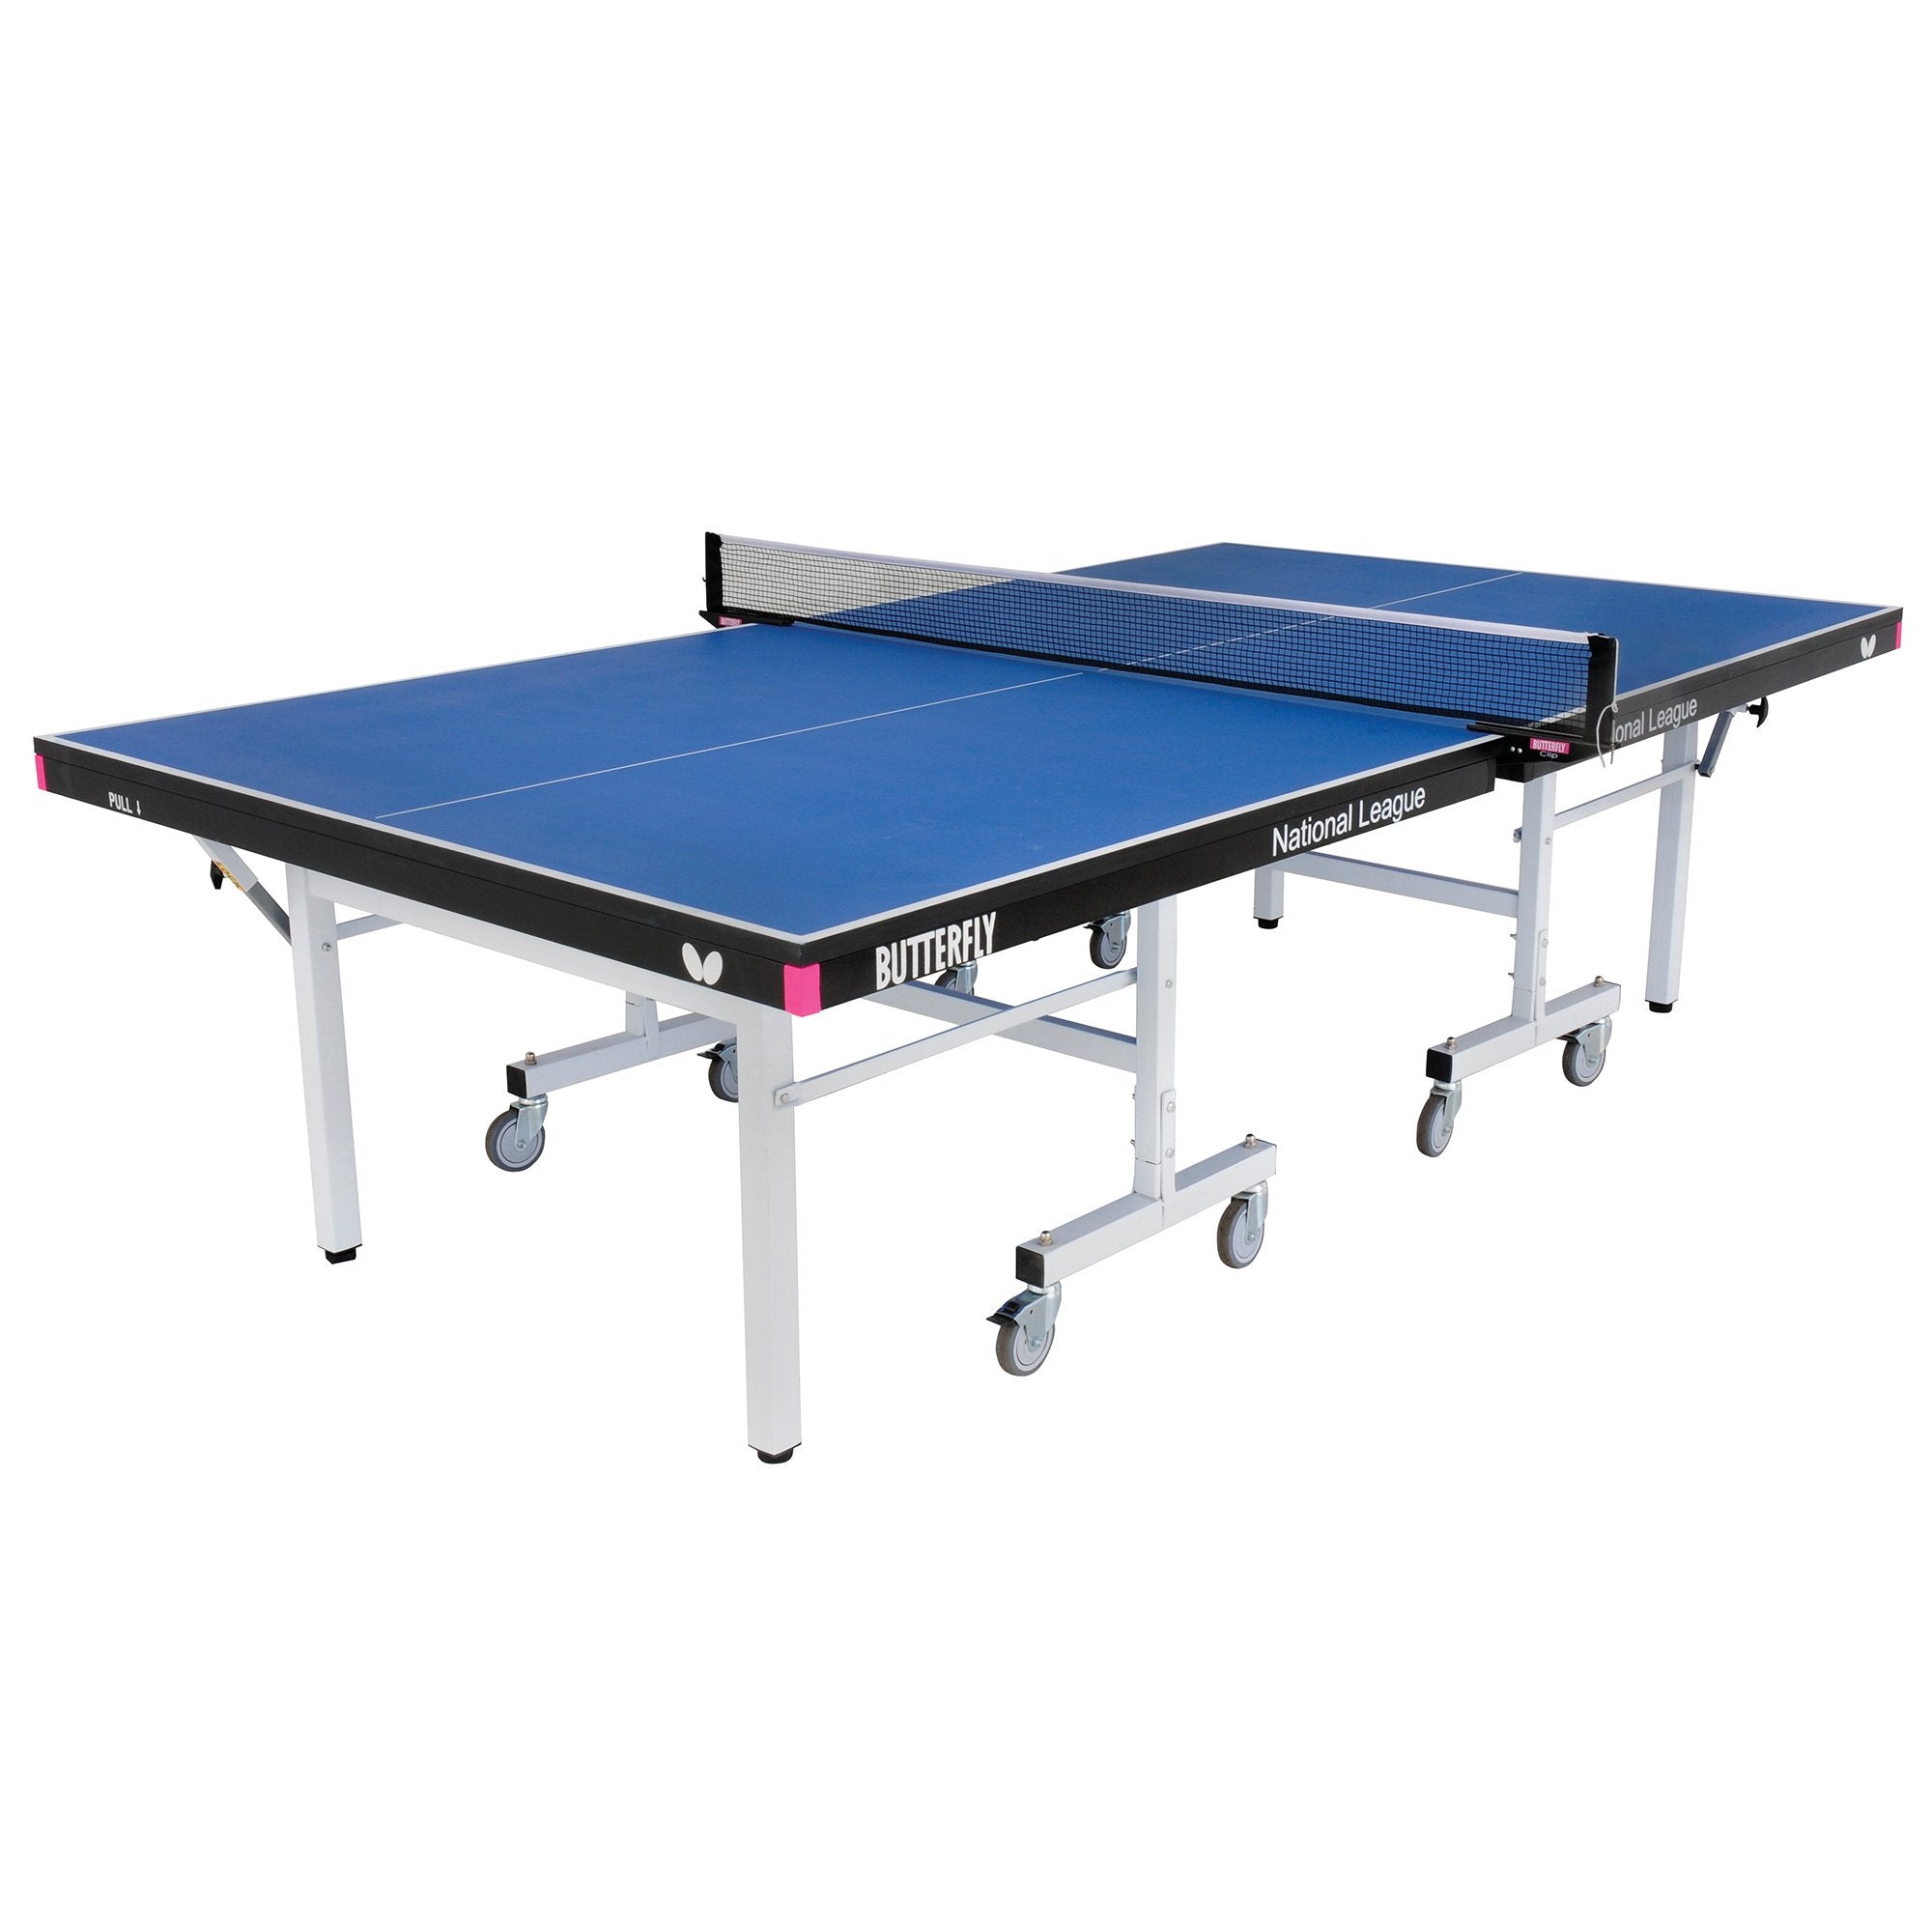 Butterfly National League 25 Rollaway Indoor Table Tennis Table